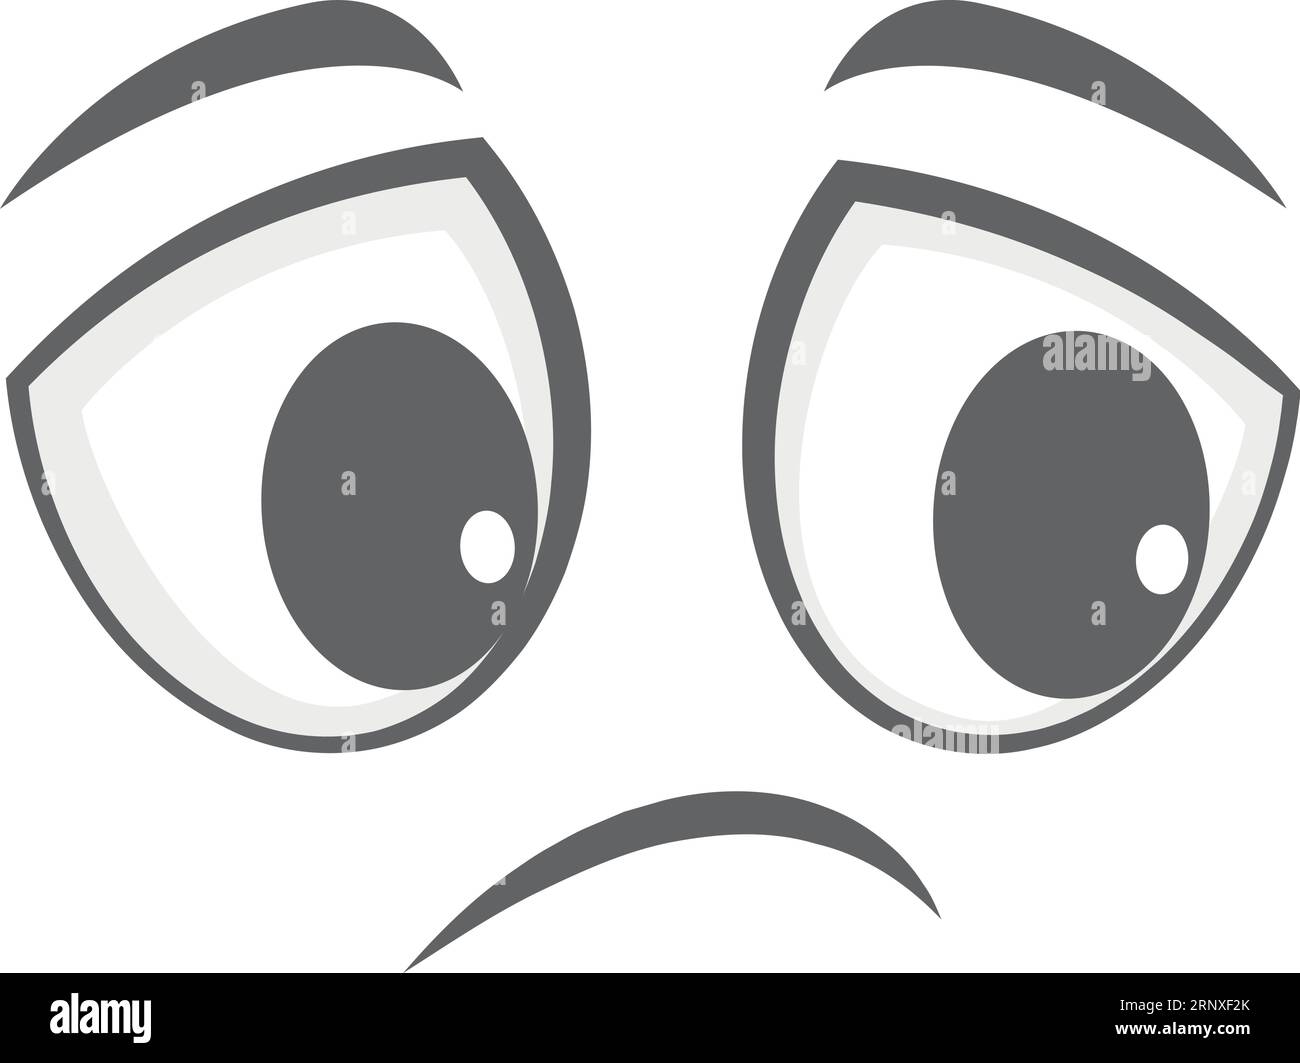 Frowning face. Unhappy worried expression for comic character Stock Vector